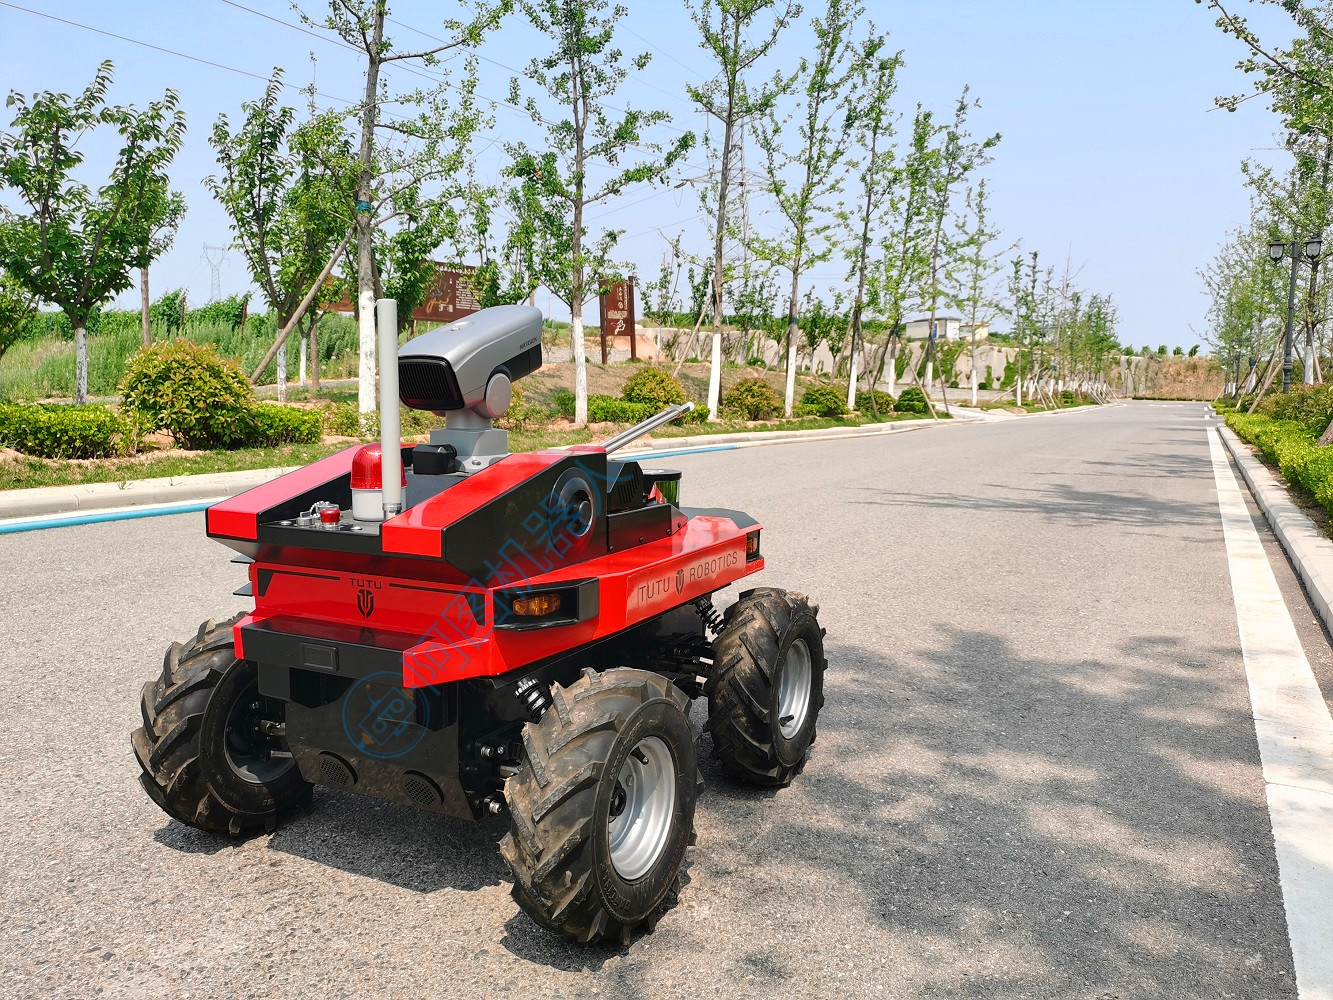 WT1000 AI Surveillance Security Patrol Robot Outdoor with Defense System Made in China